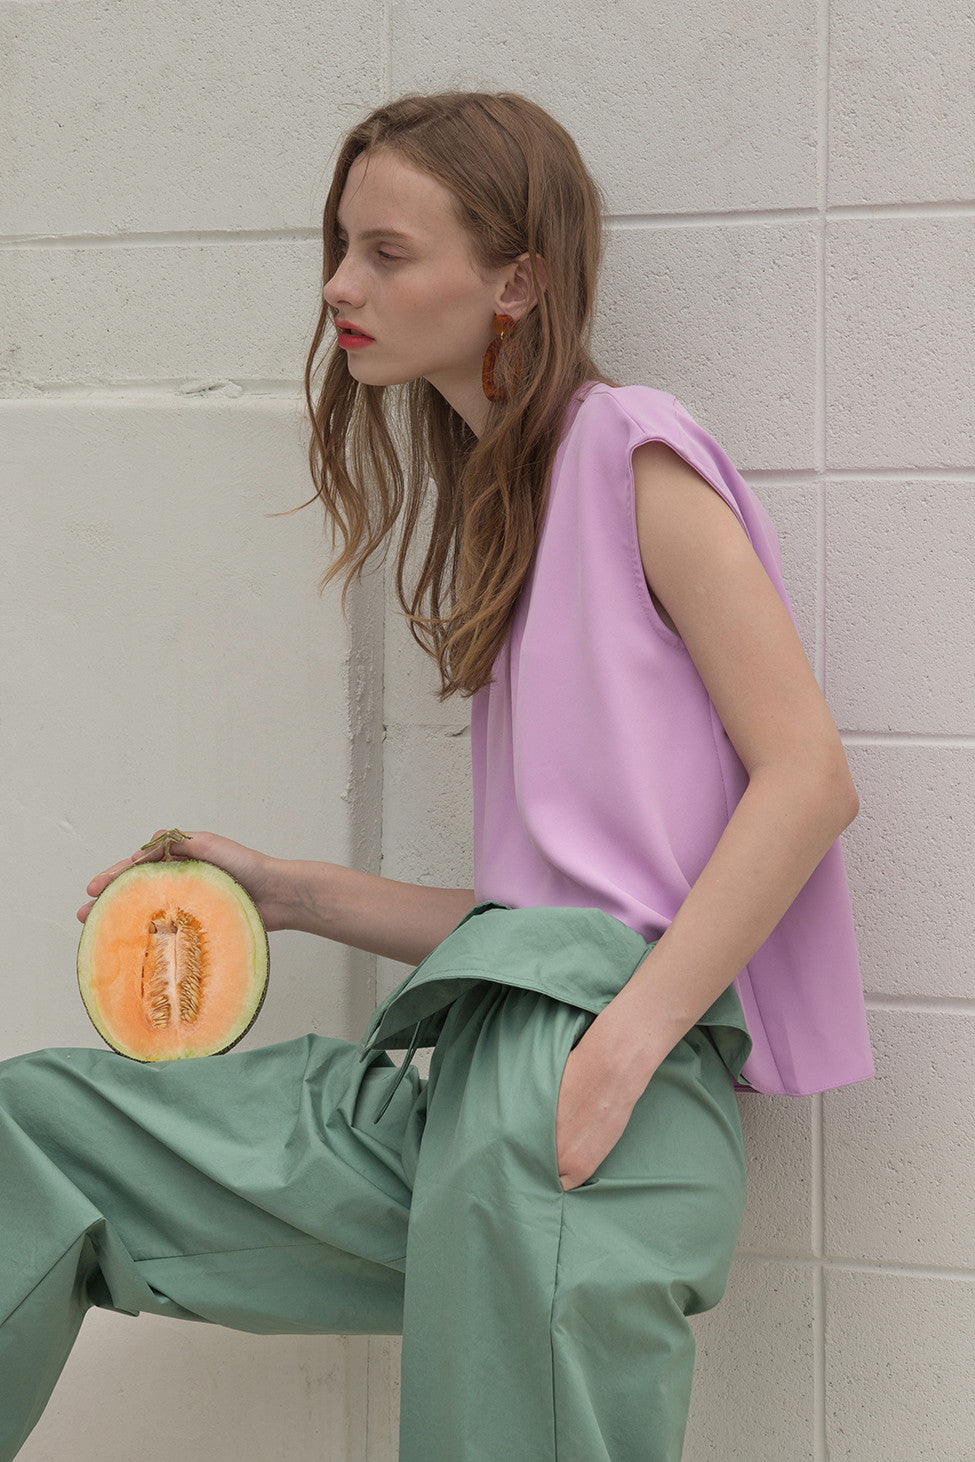 The Sofie Top in Lilac featuring cap short sleeves, asymmetric cropped hem, keyhole closure at back. 